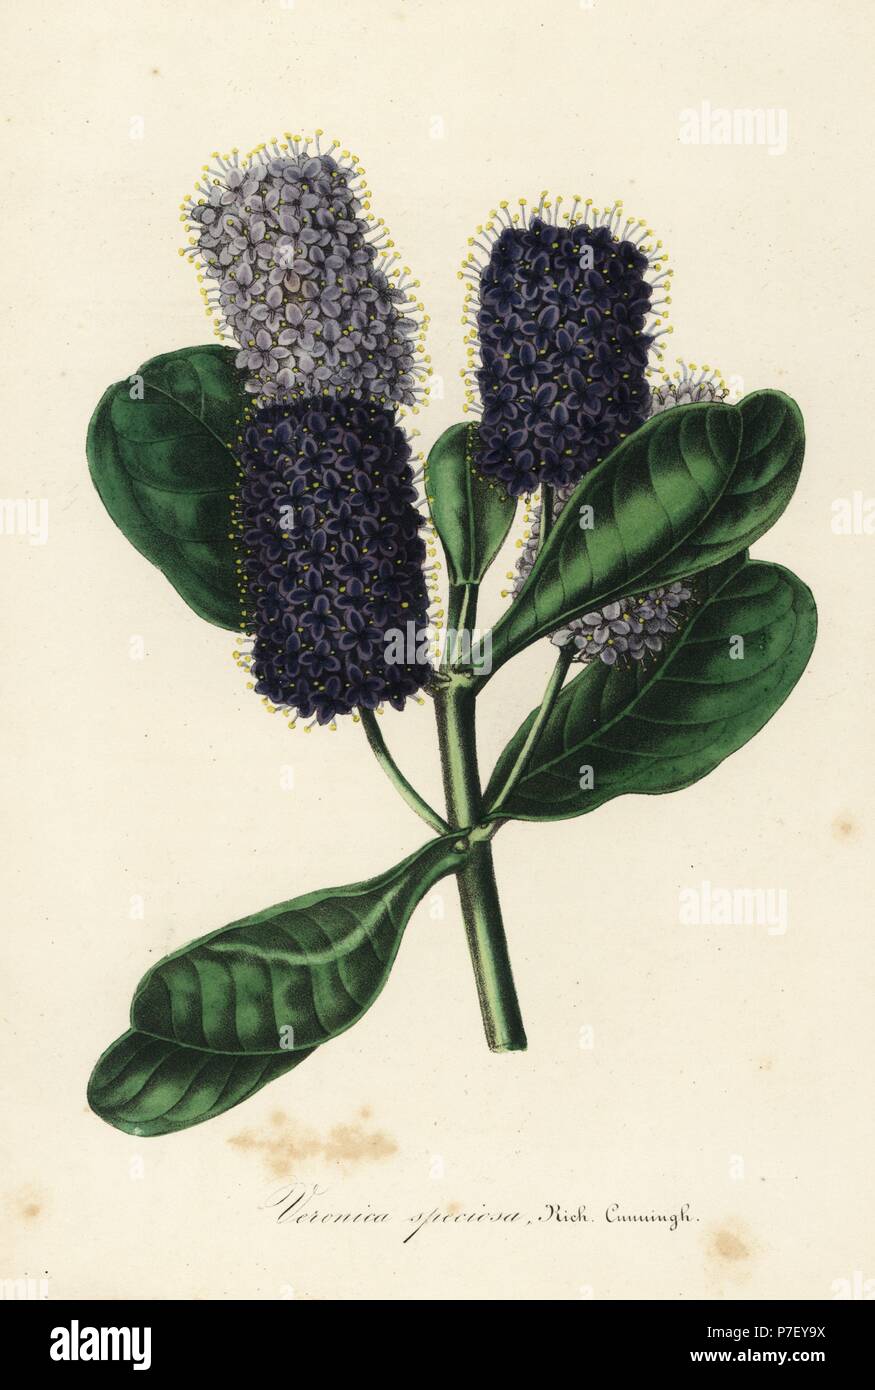 New Zealand hebe, Veronica speciosa. Handcoloured lithograph from Louis van Houtte and Charles Lemaire's Flowers of the Gardens and Hothouses of Europe, Flore des Serres et des Jardins de l'Europe, Ghent, Belgium, 1845. Stock Photo